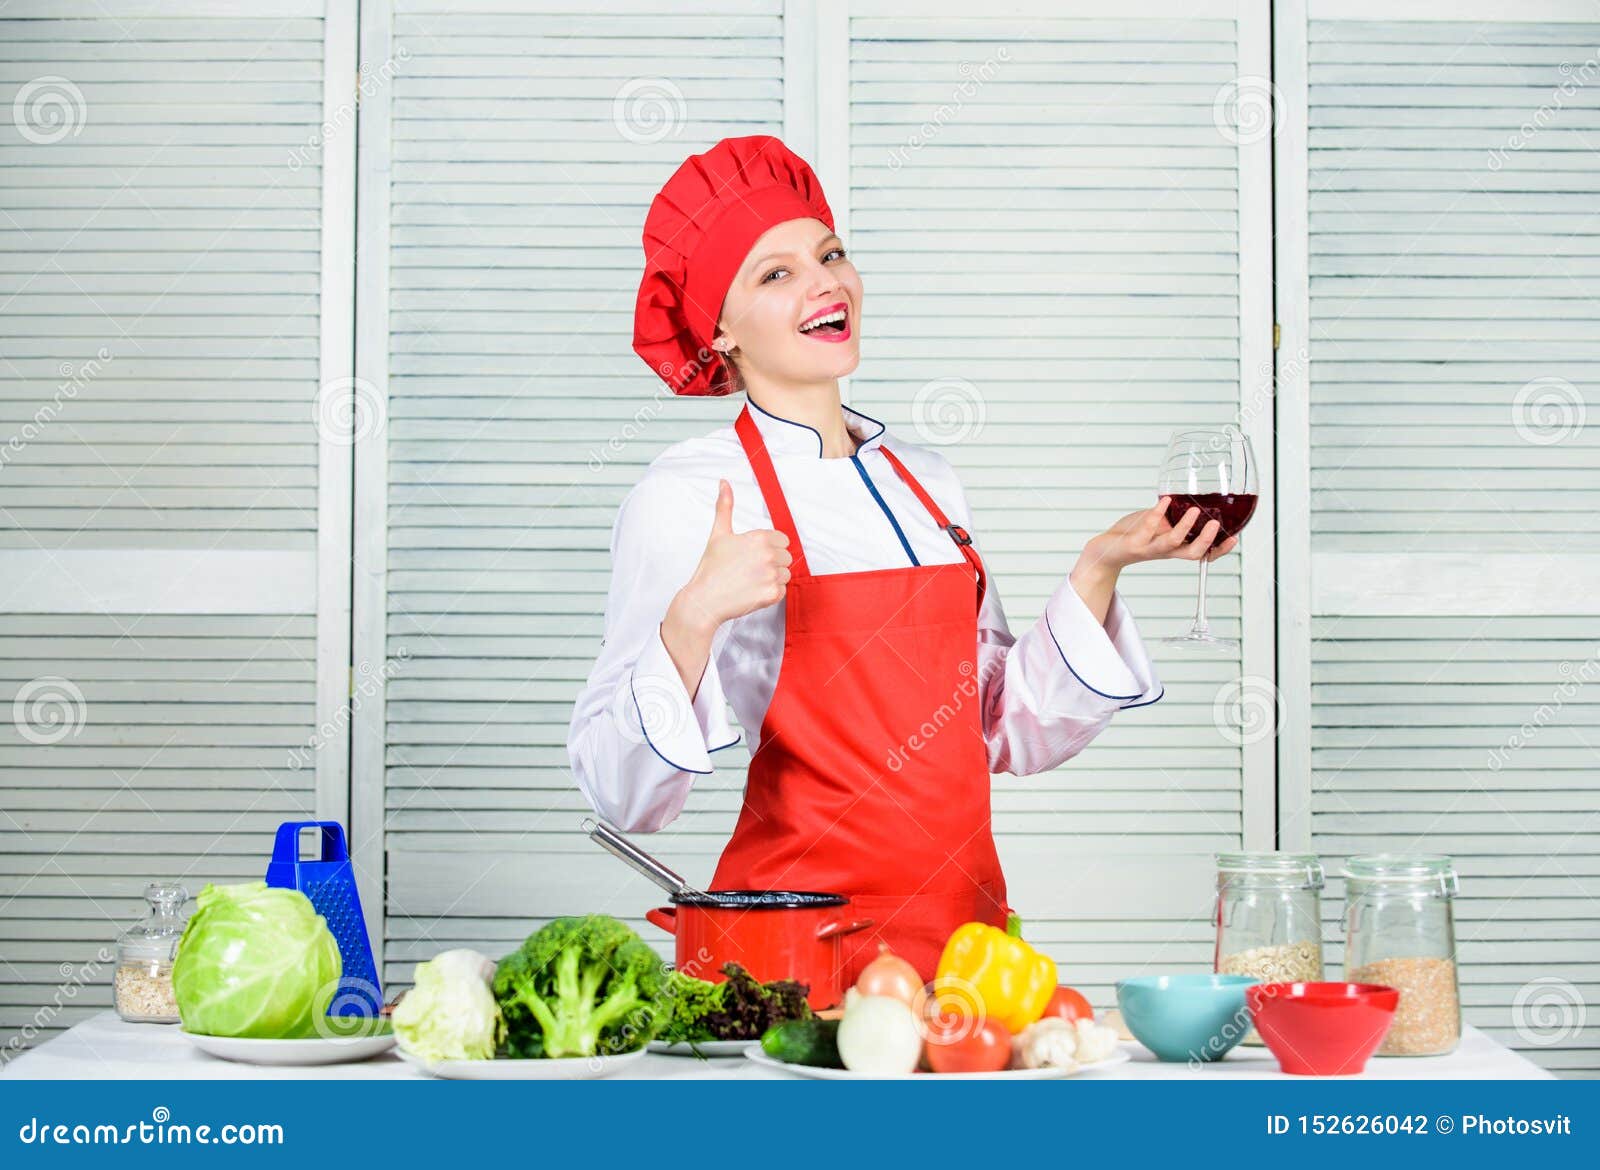 Professional Chef in Kitchen. Happy Woman Cooking Healthy Food by ...